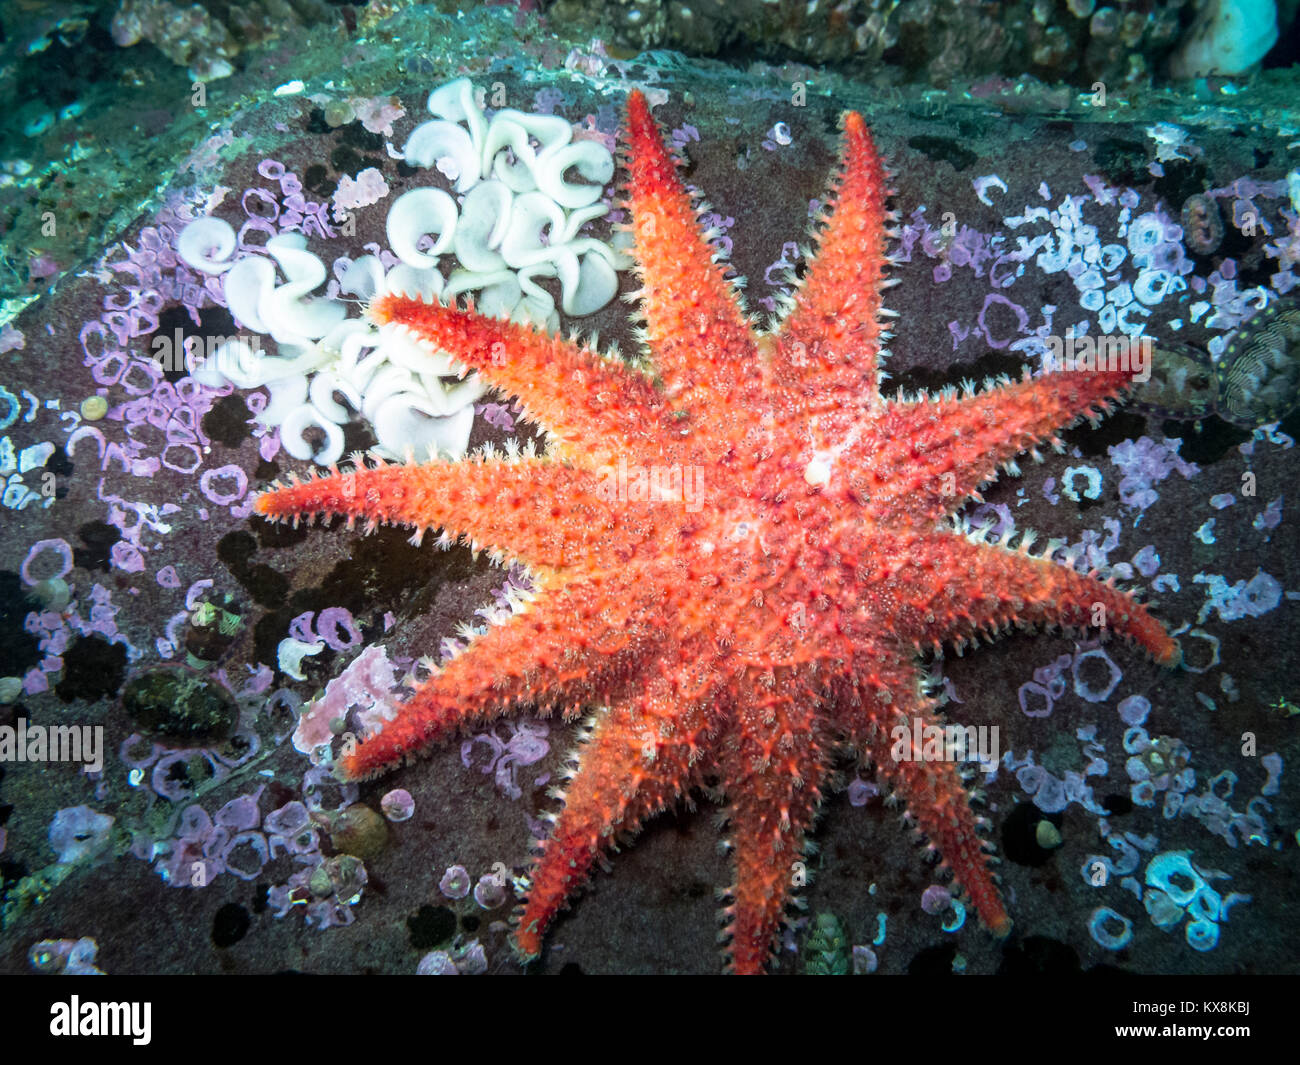 A vibrant star with many common names photographed in southern British Columbia at a depth of 30ft. Nudibranch eggs on top left of boulder as well. Stock Photo